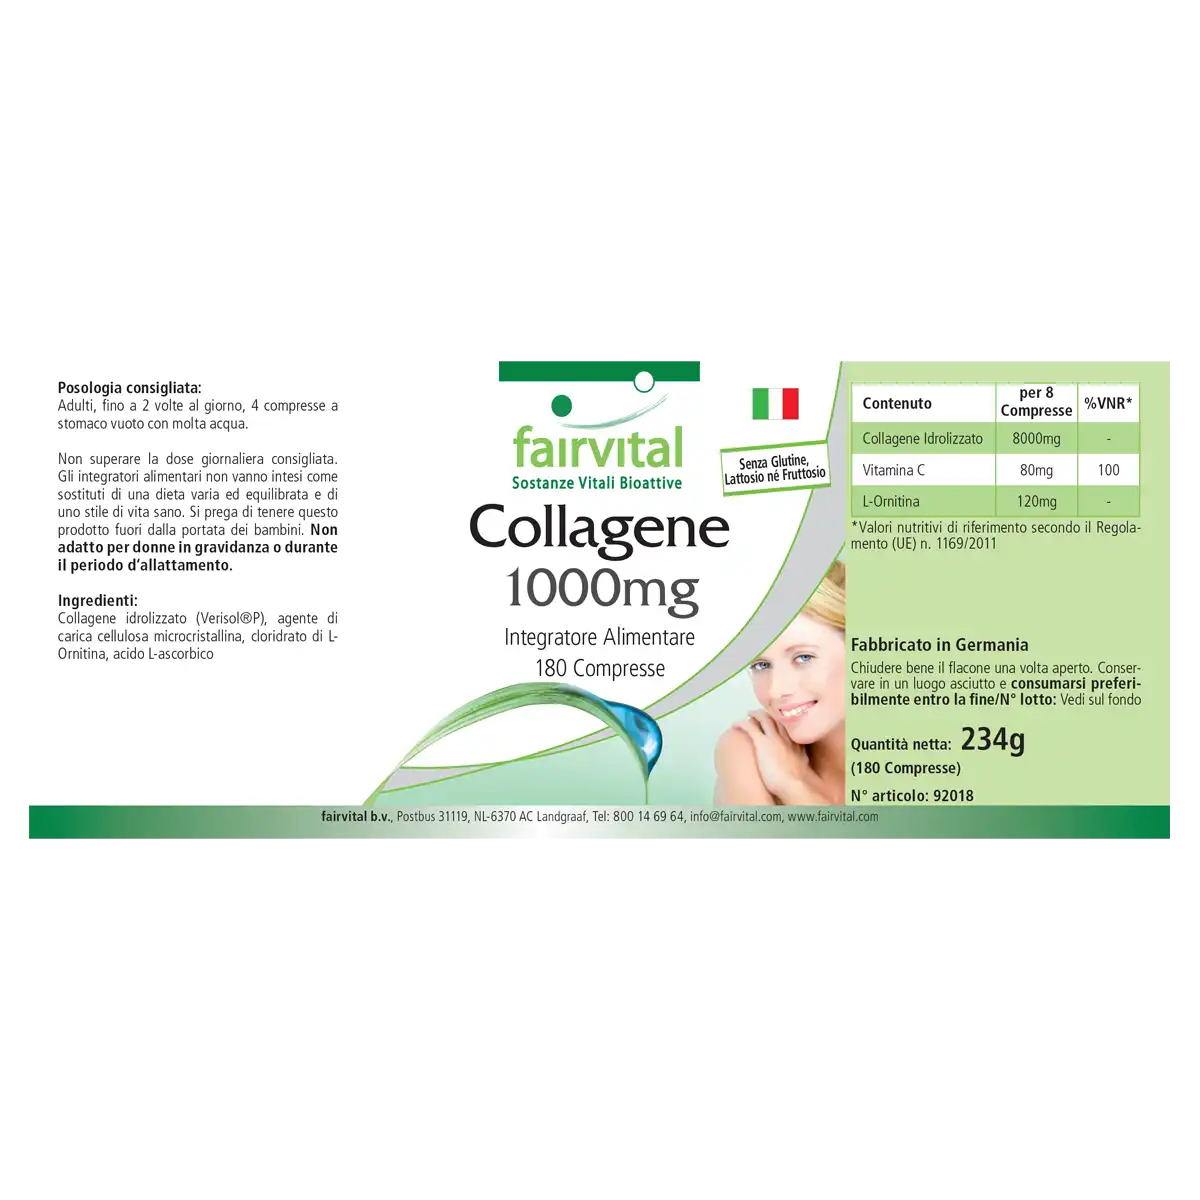 Collagen 1000mg - 180 tablets